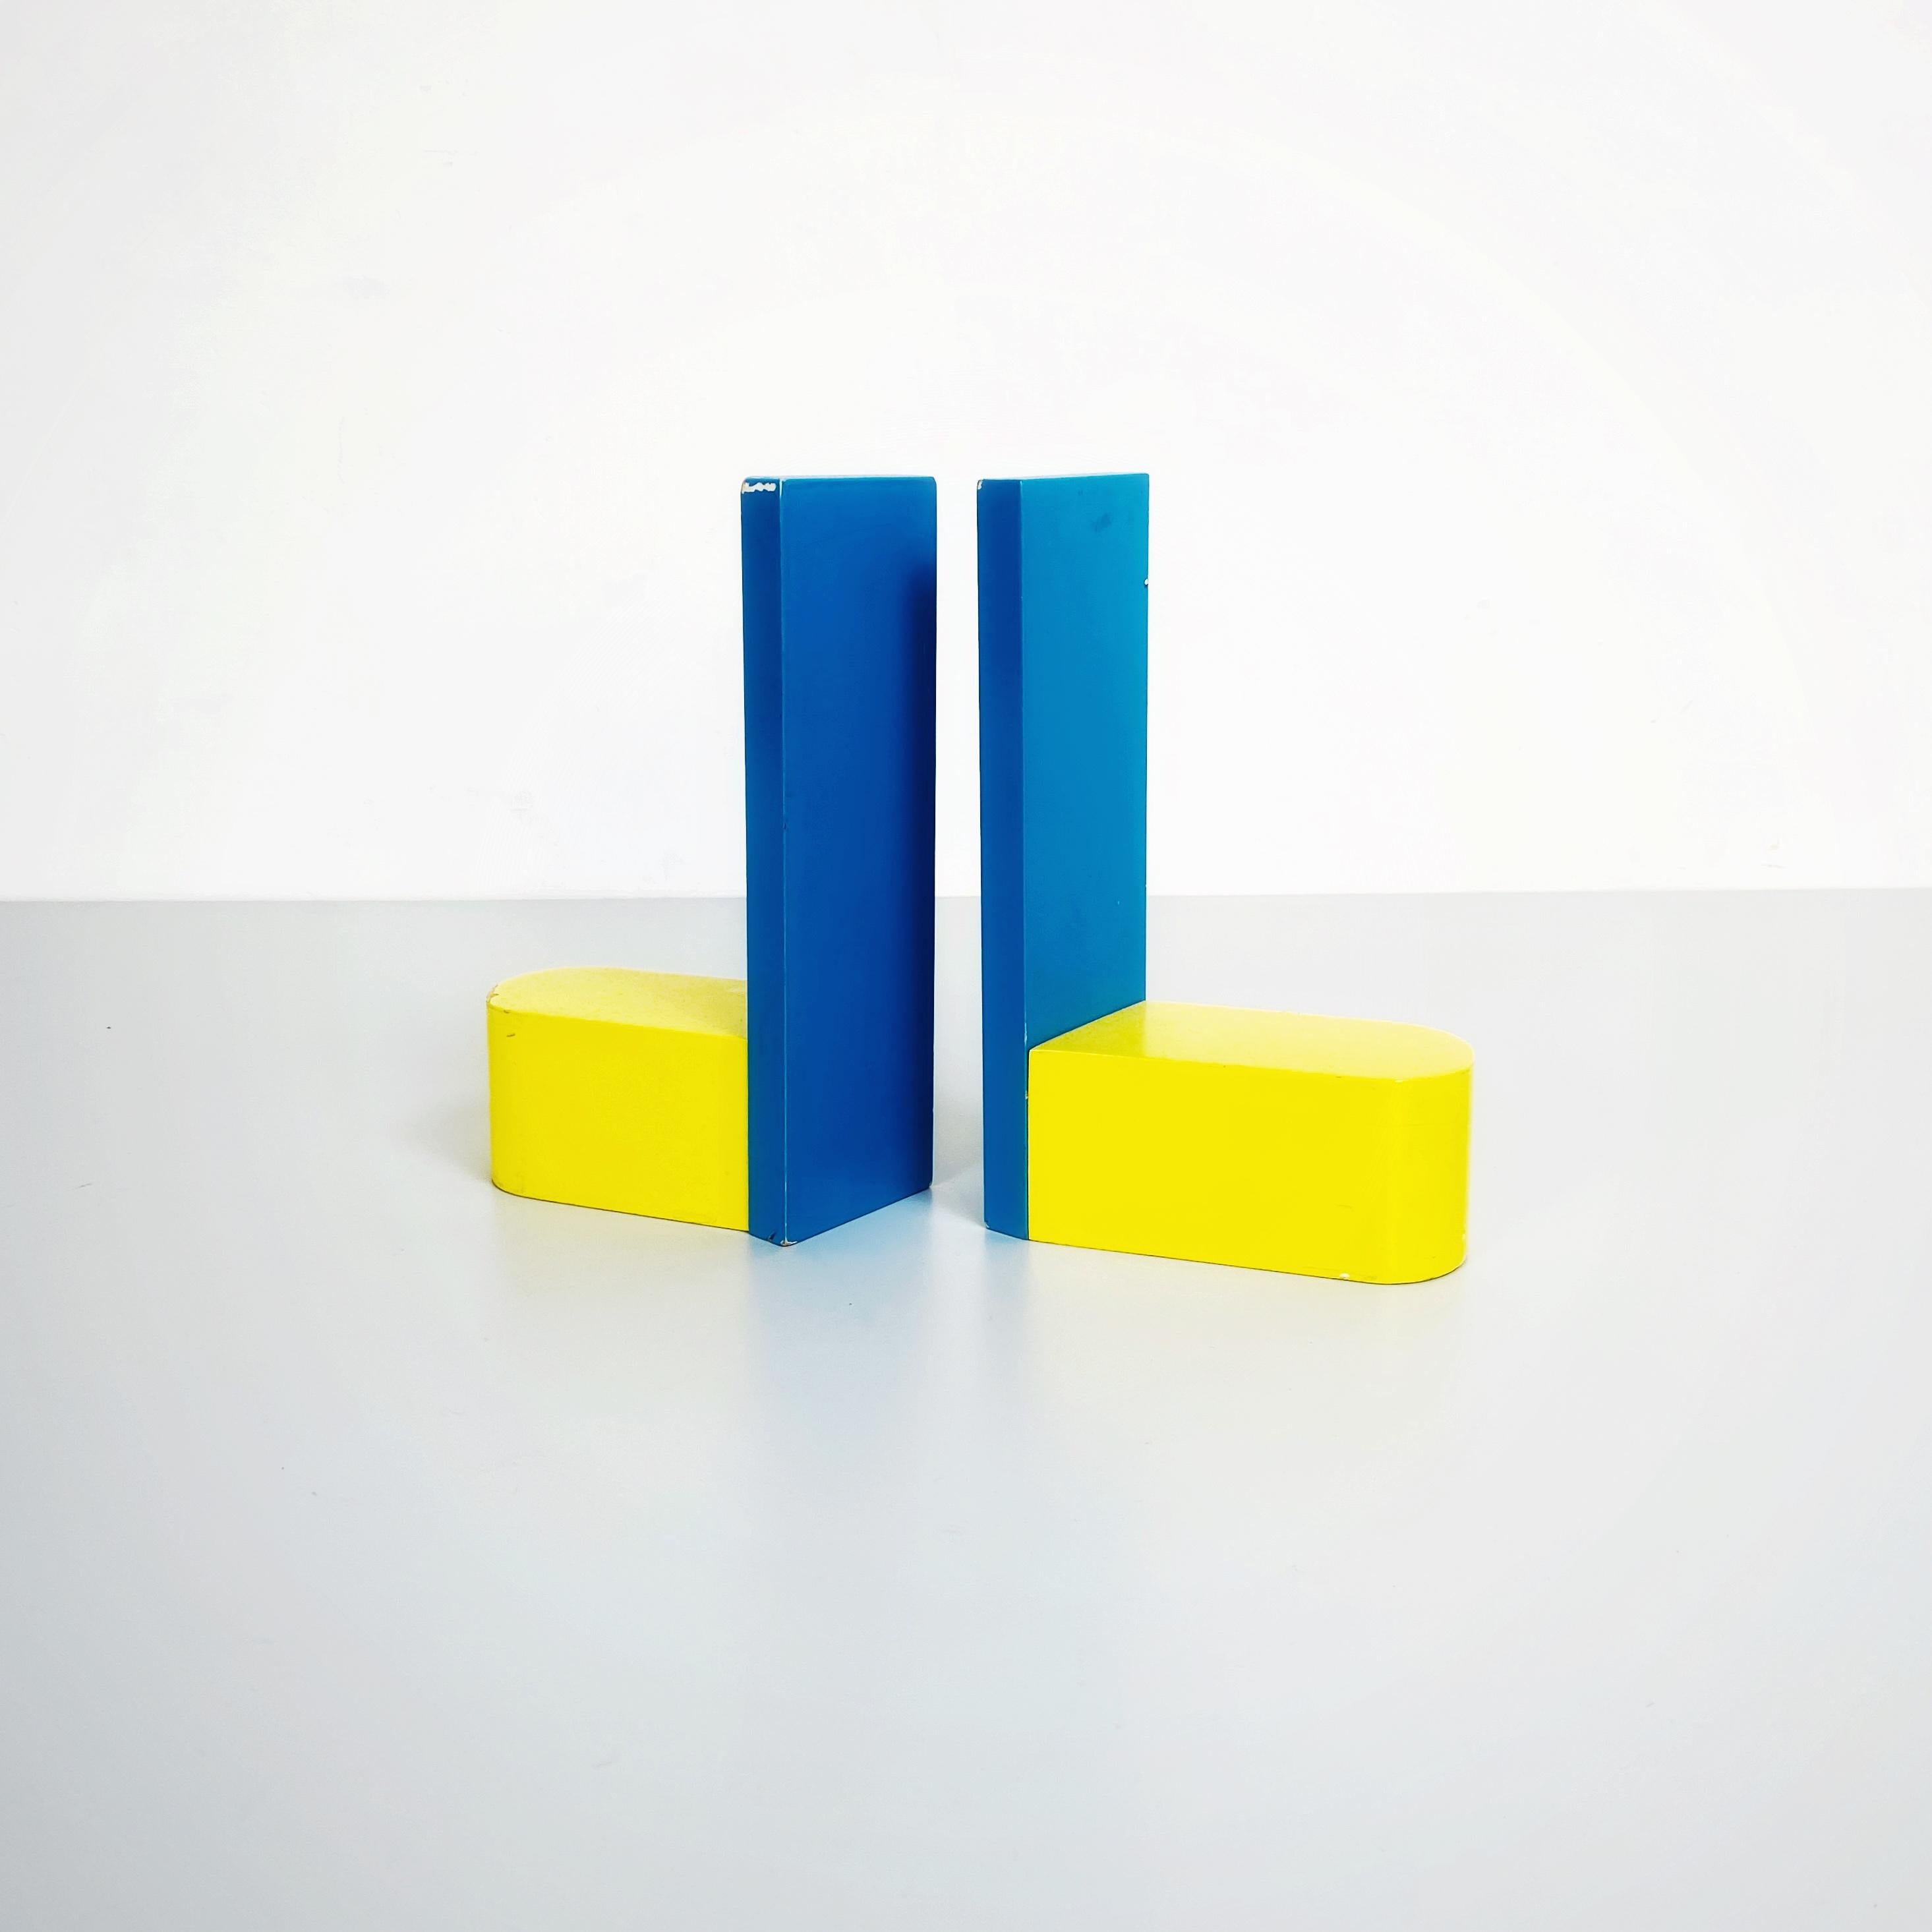 Italian Mid-Century Modern yellow and blue wooden bookends, 1960s
Colored bookends with a rounded L-shape in wood, painted in blue and yellow. 

Good condition, paint skipped in some places.

Measures in cm 10 x 14 x 23 H.